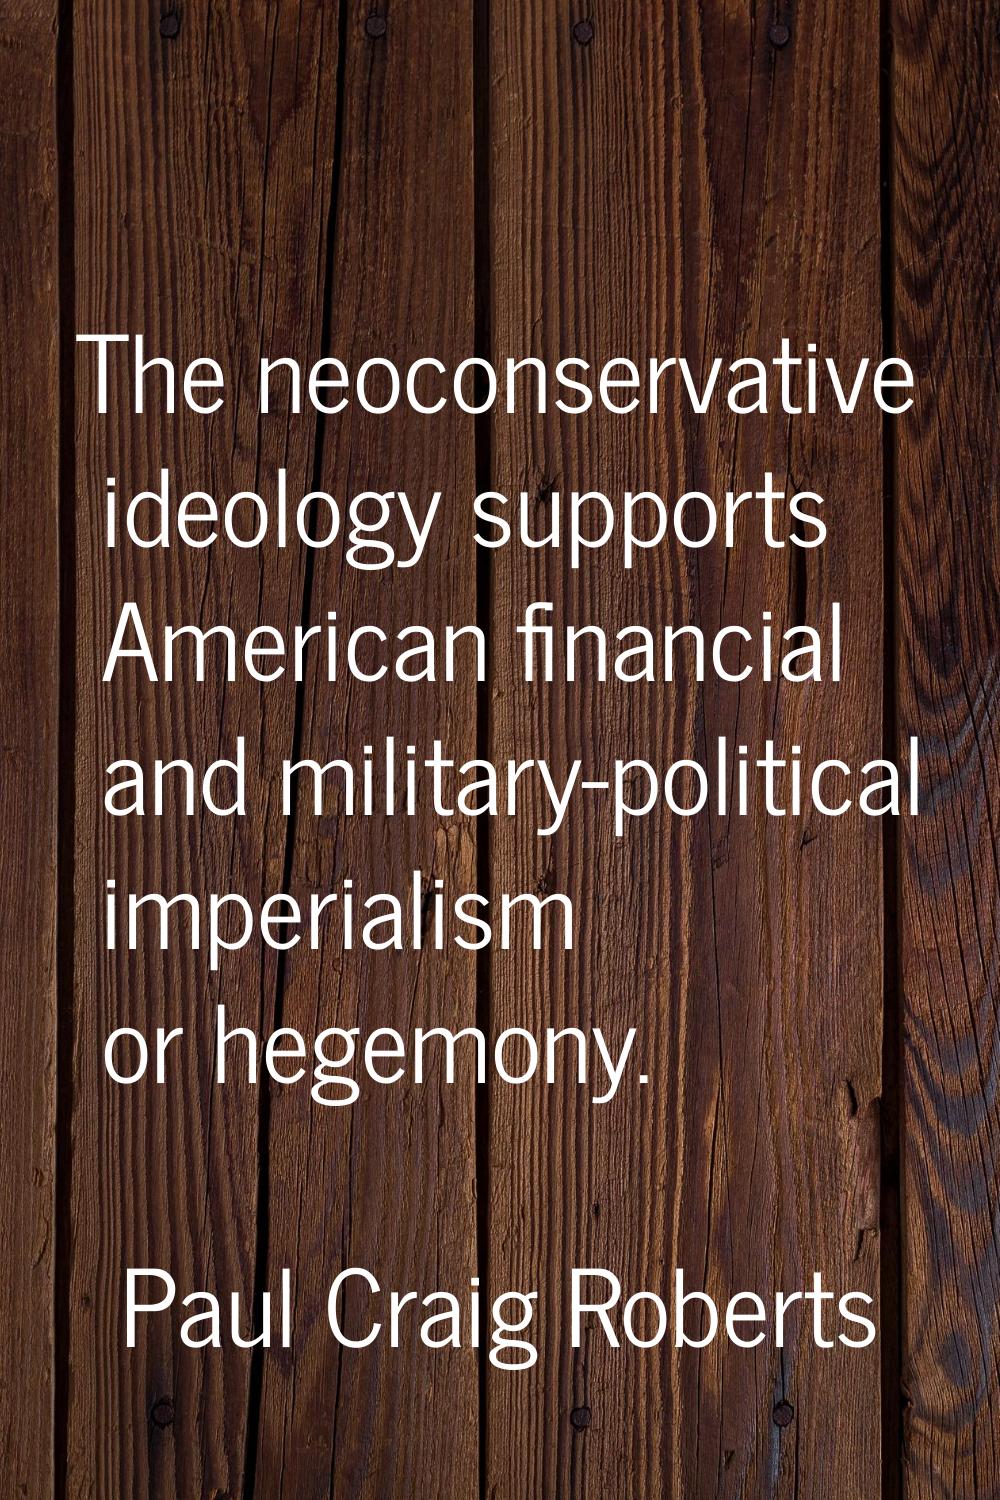 The neoconservative ideology supports American financial and military-political imperialism or hege